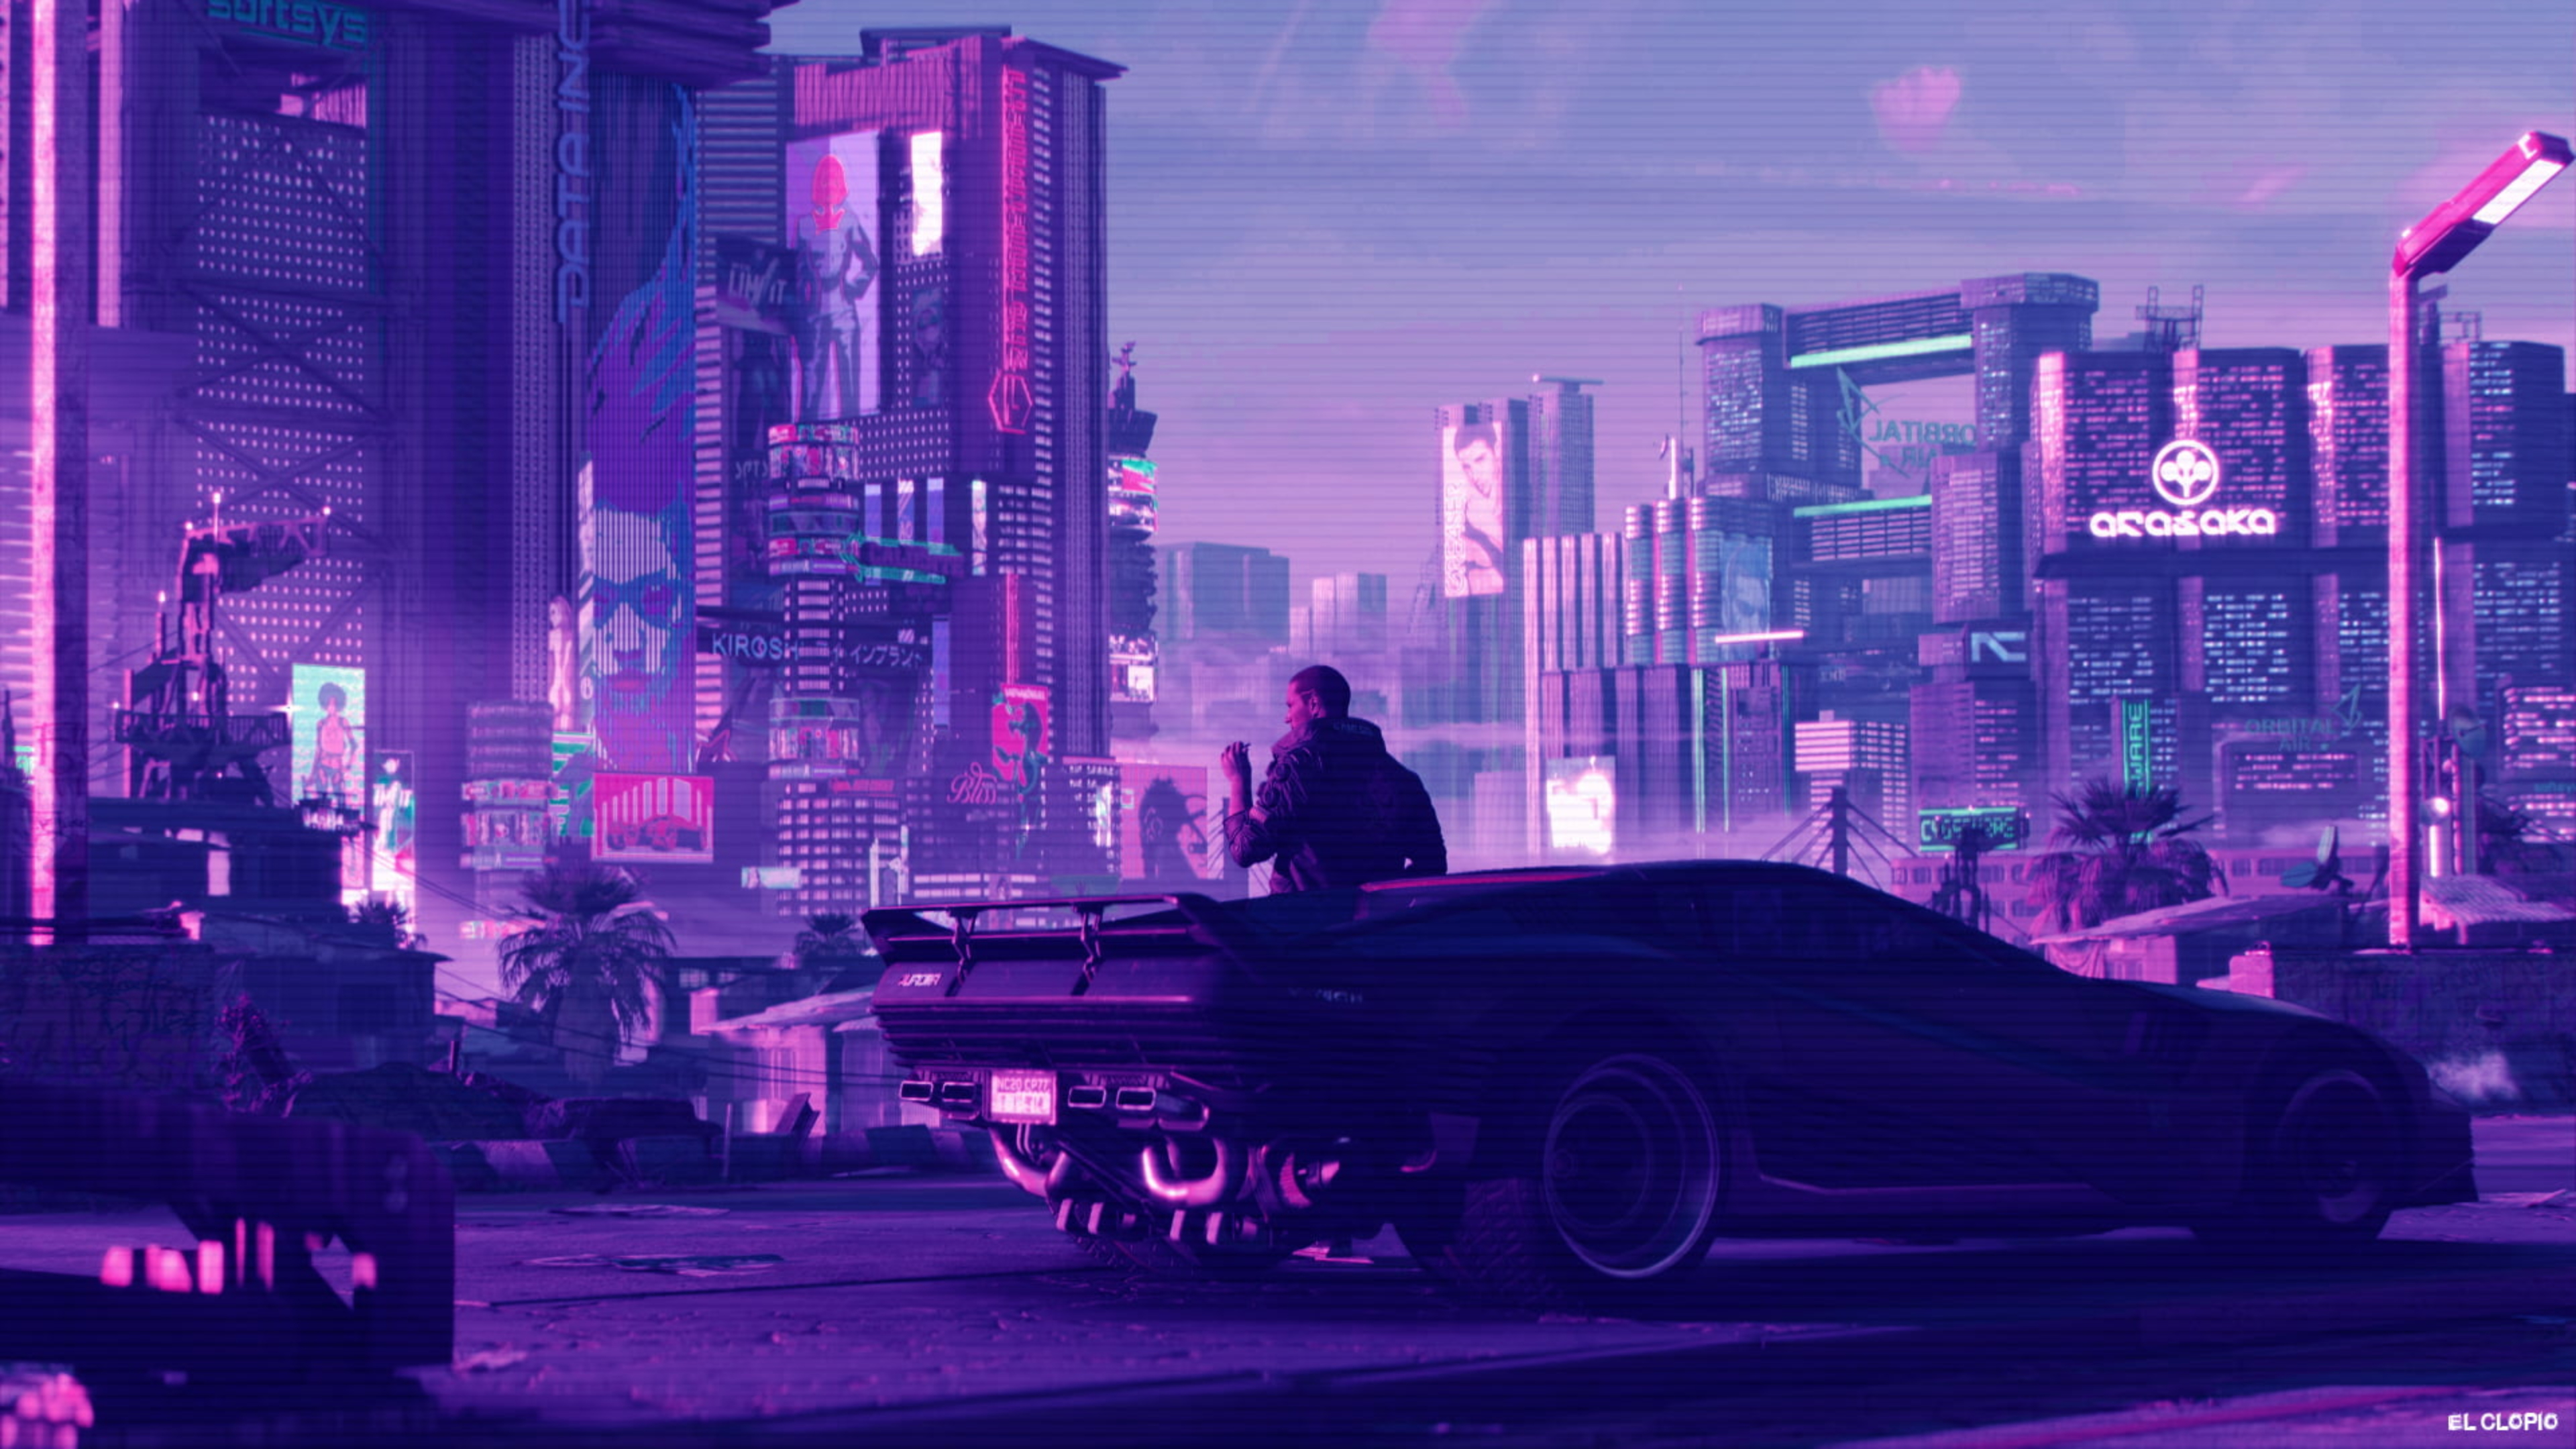 synthwave 1080P 2k 4k Full HD Wallpapers Backgrounds Free Download   Wallpaper Crafter